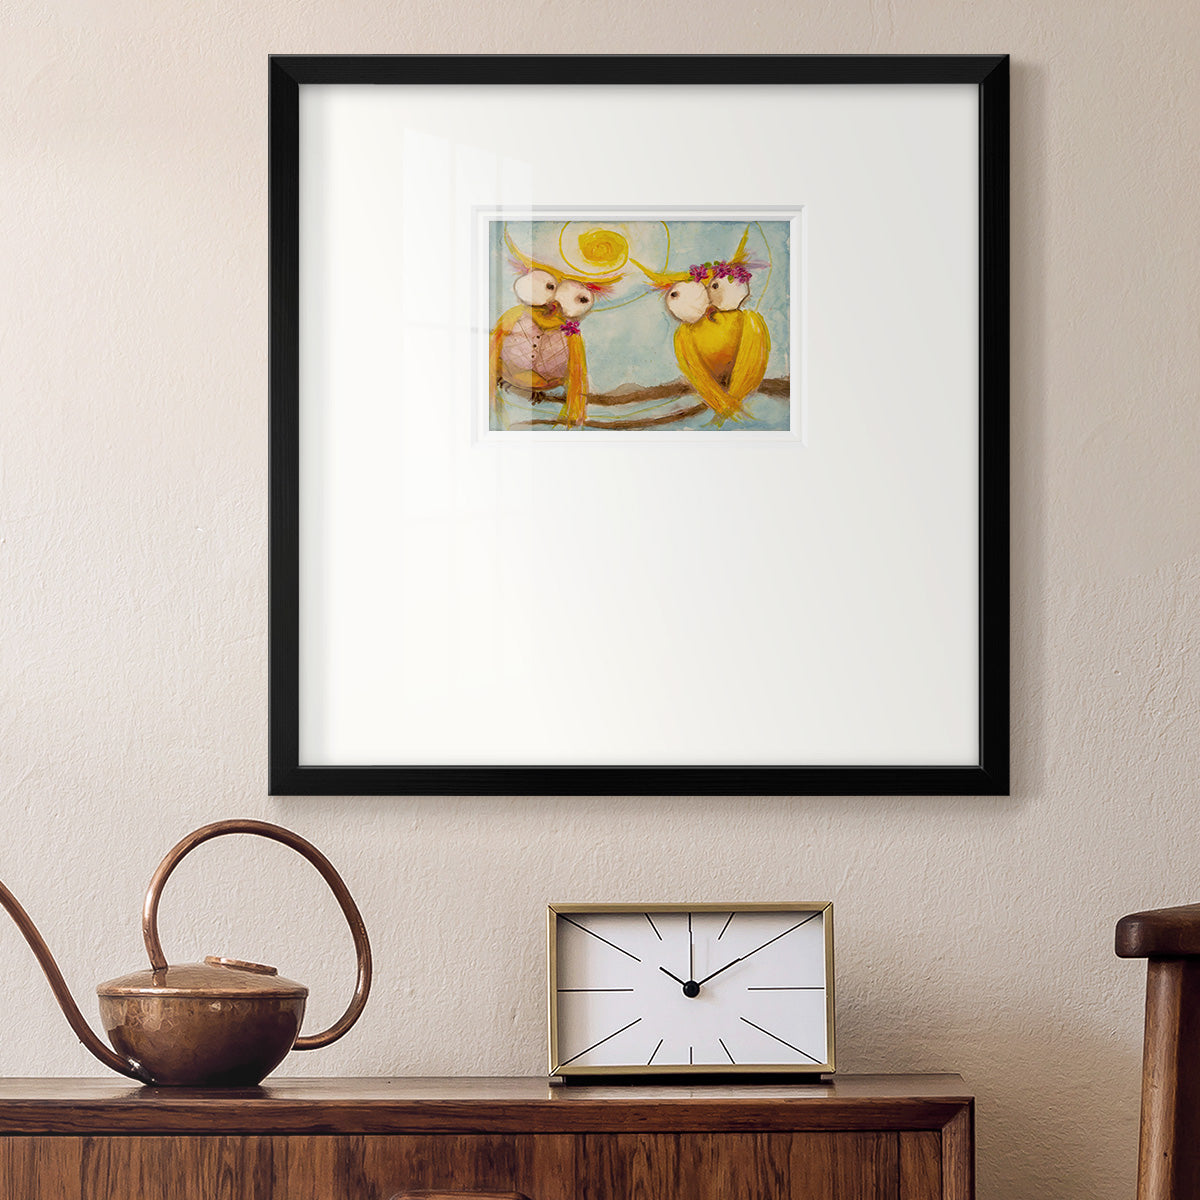 Hoos Branch for Two Premium Framed Print Double Matboard